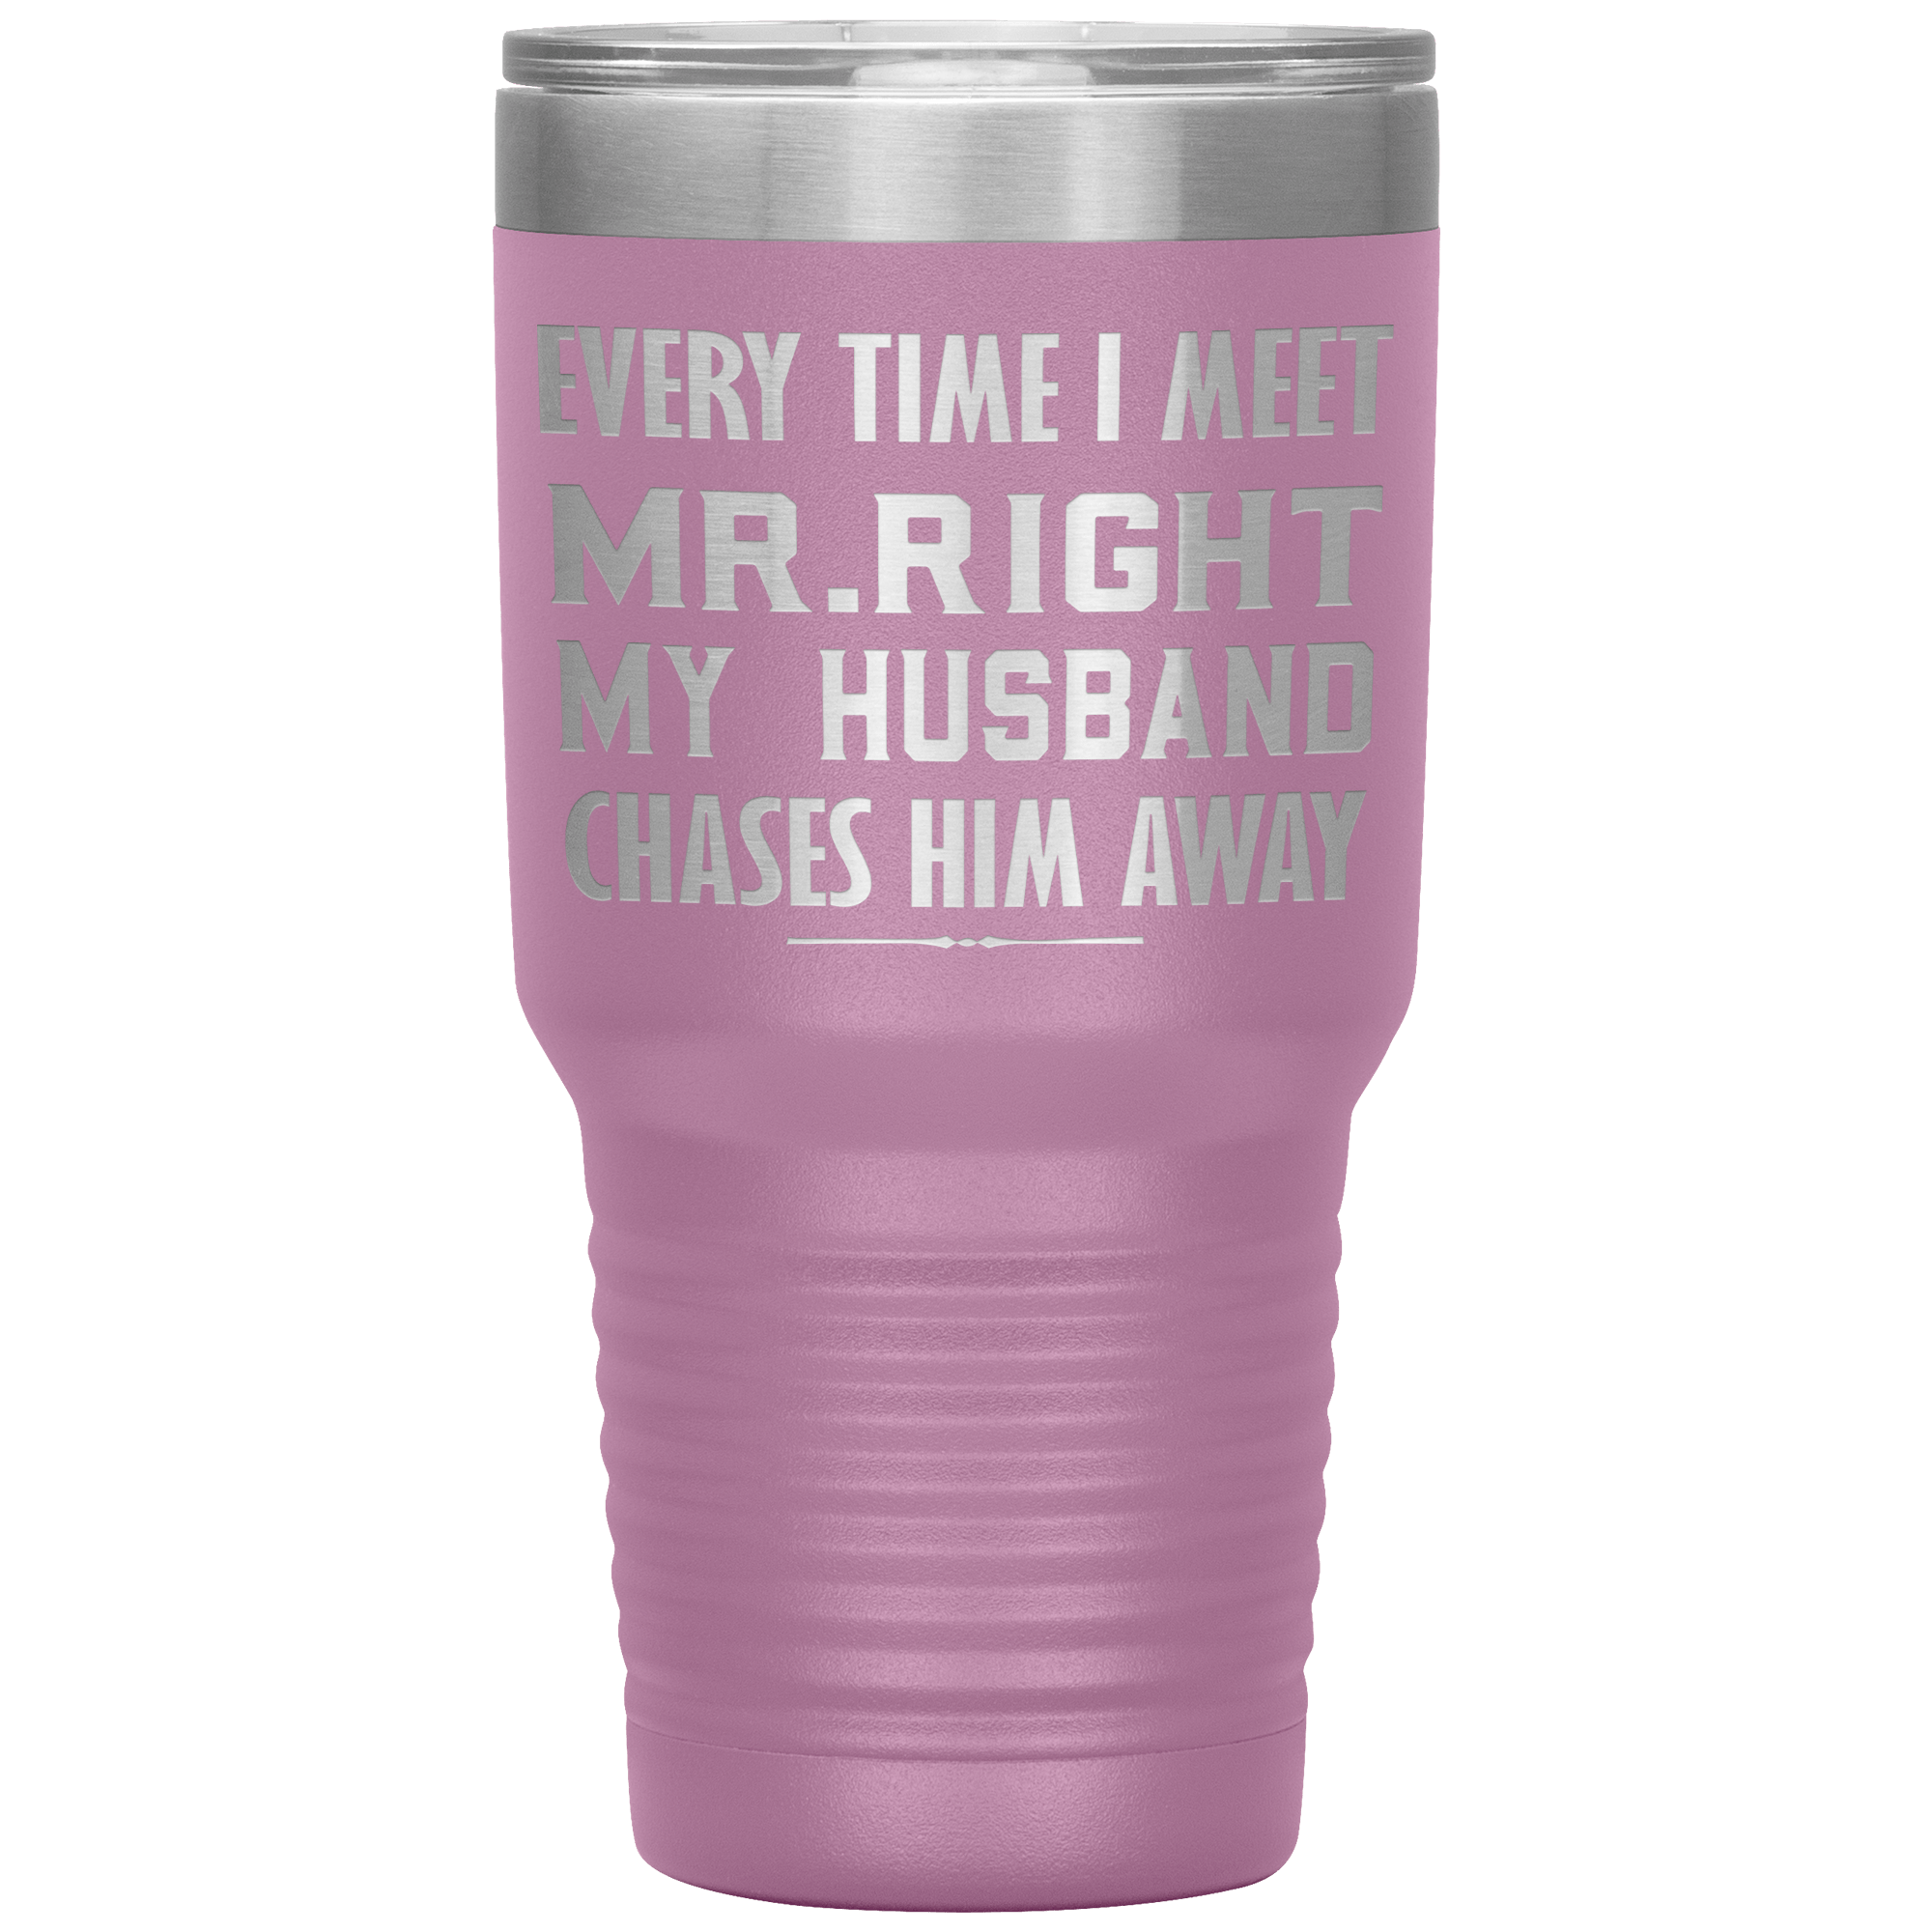 EVERY TIME I MEET MR. RIGHT MY HUSBAND CHASES HIM - TUMBLER